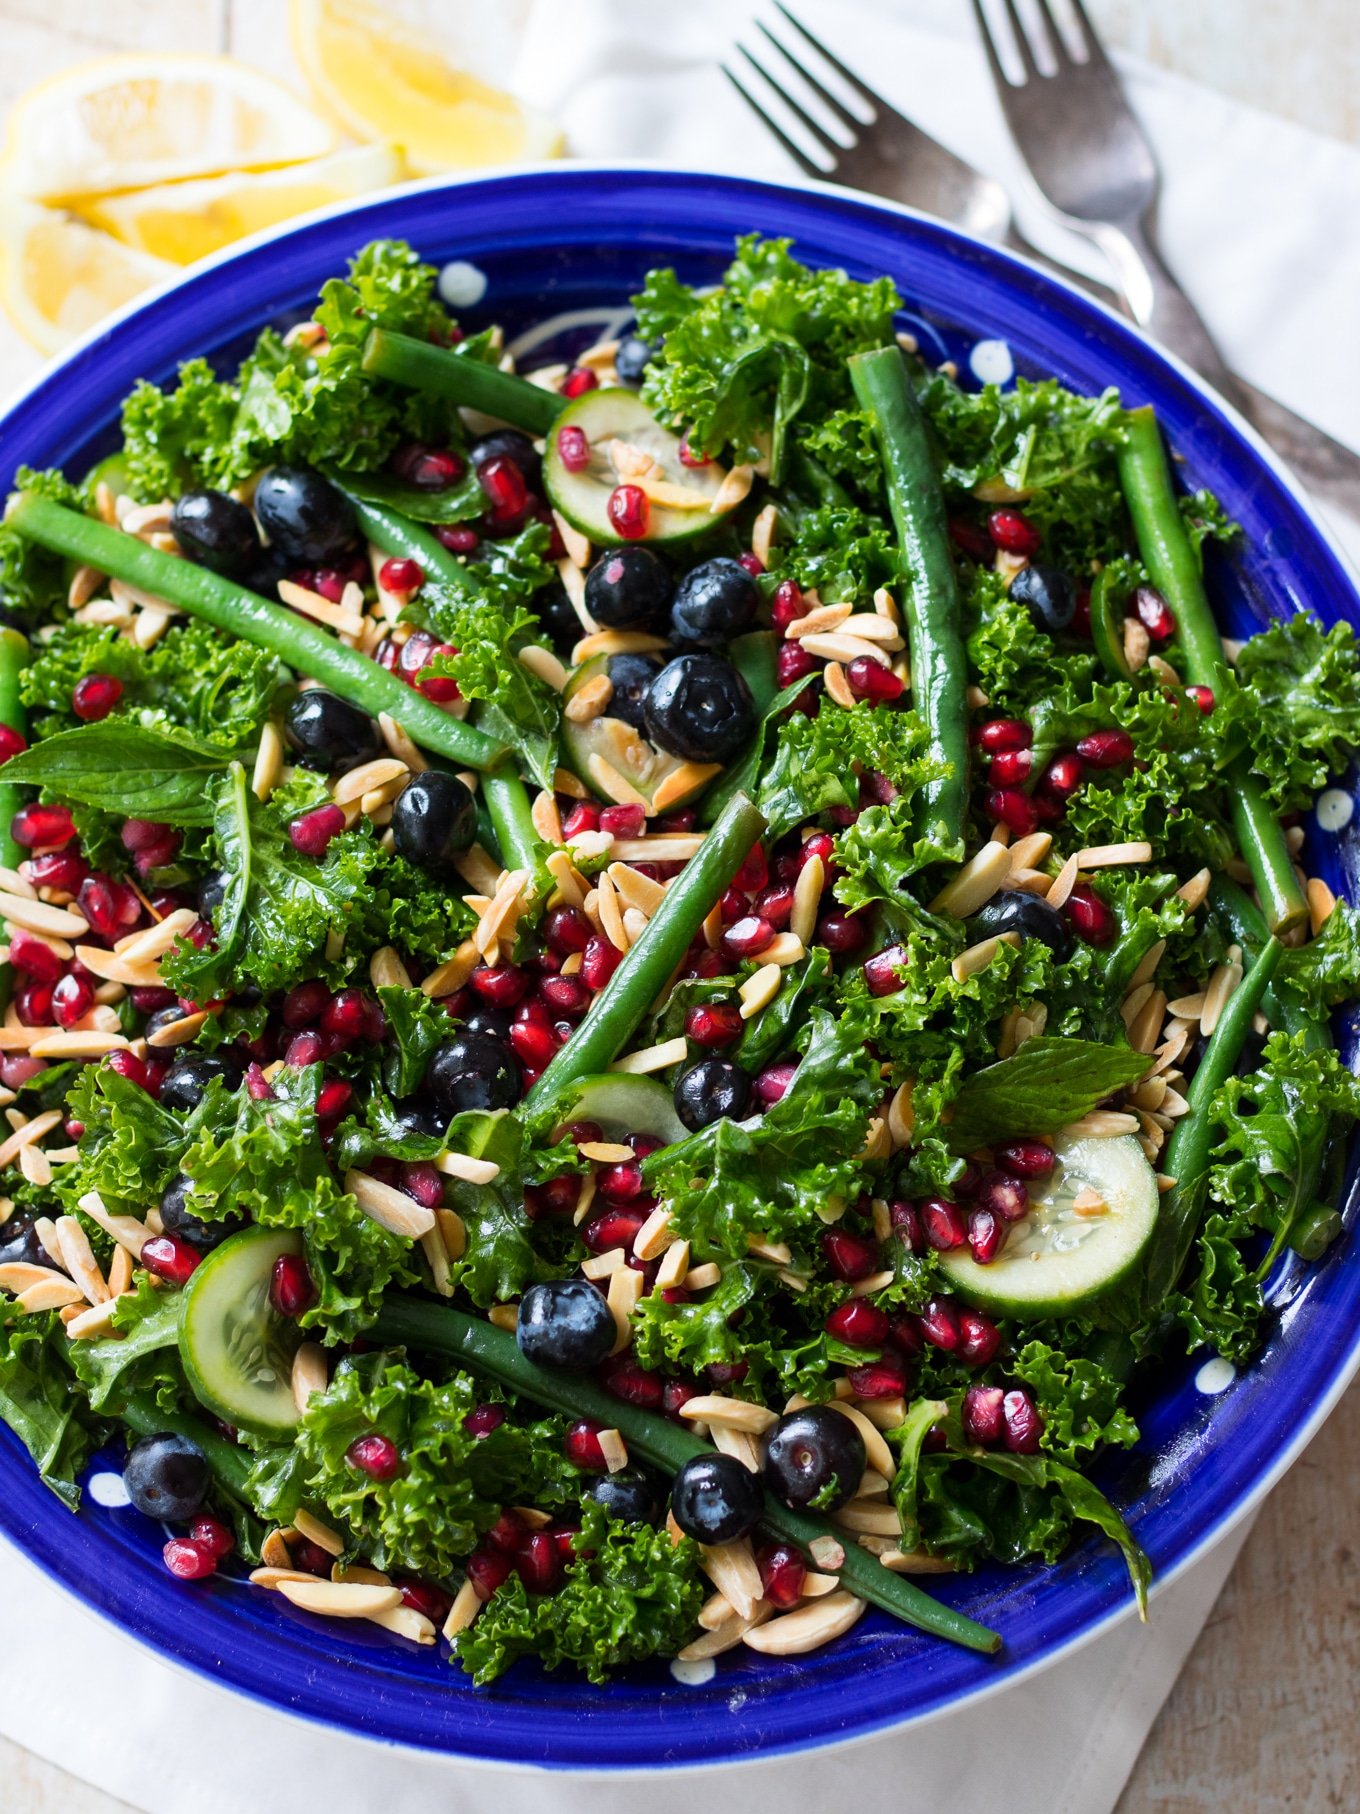 Fresh and vibrant this summery blueberry kale salad combines loads of greens, blueberries and pomegranate. {gluten free, dairy free, grain free, paleo} #kalesalad #blueberries #paleo #healthyrecipe